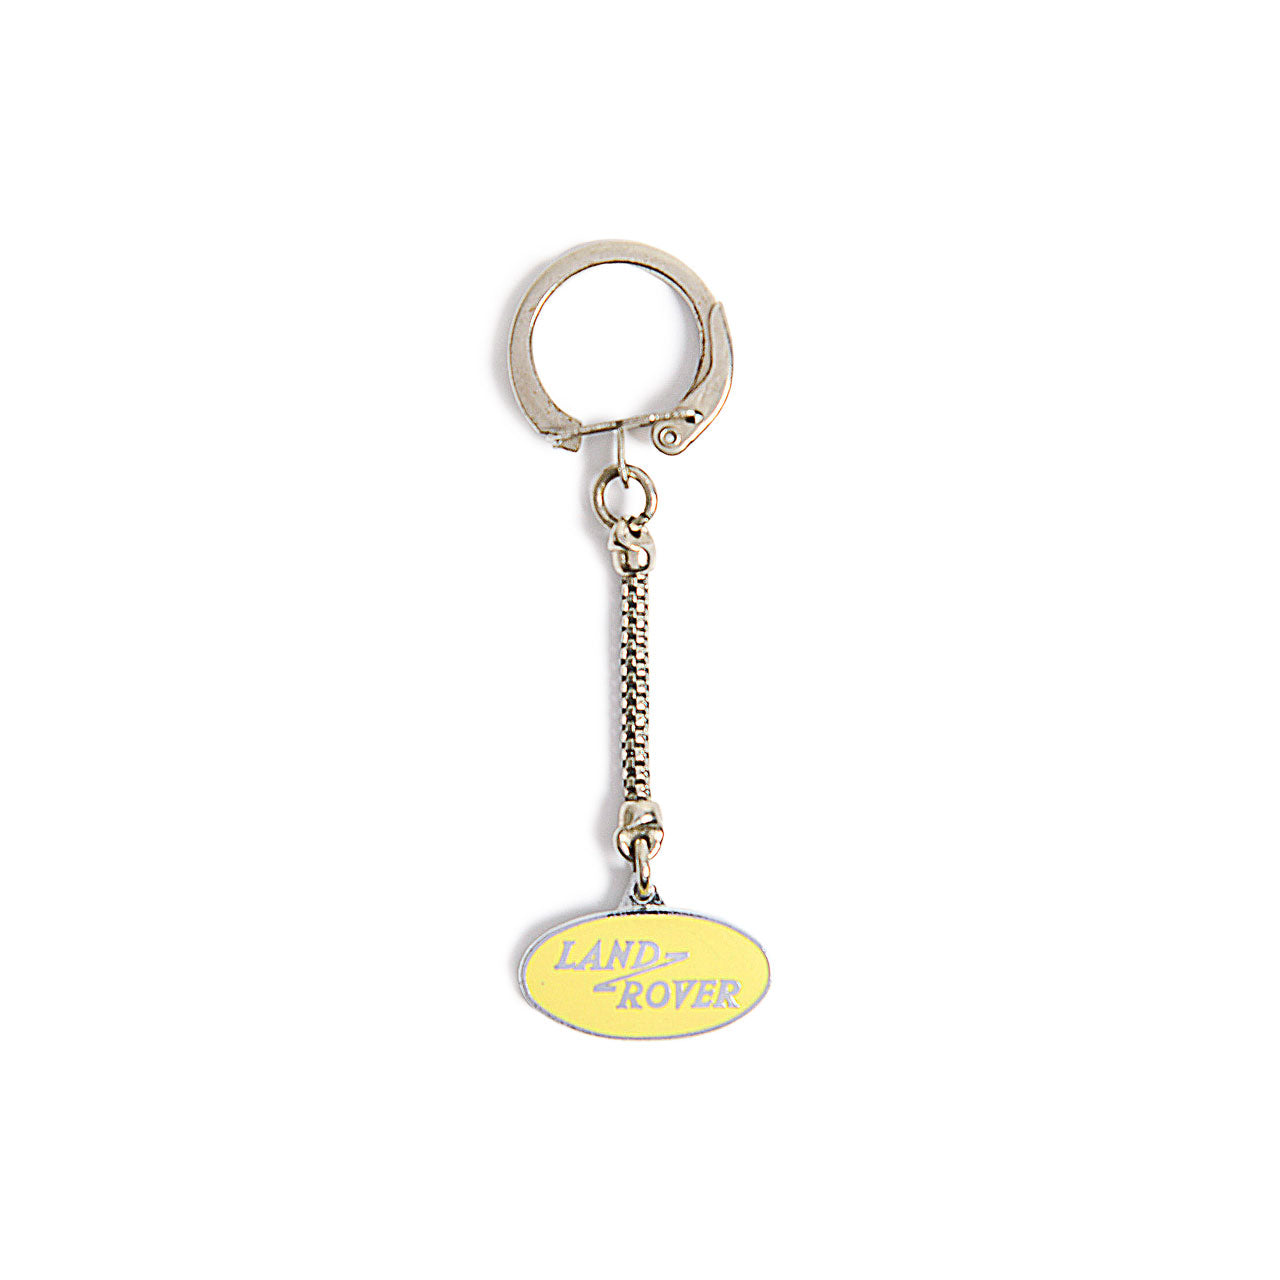 Mr. Cupps x Uncrate Vintage Yellow Land Rover Keychain